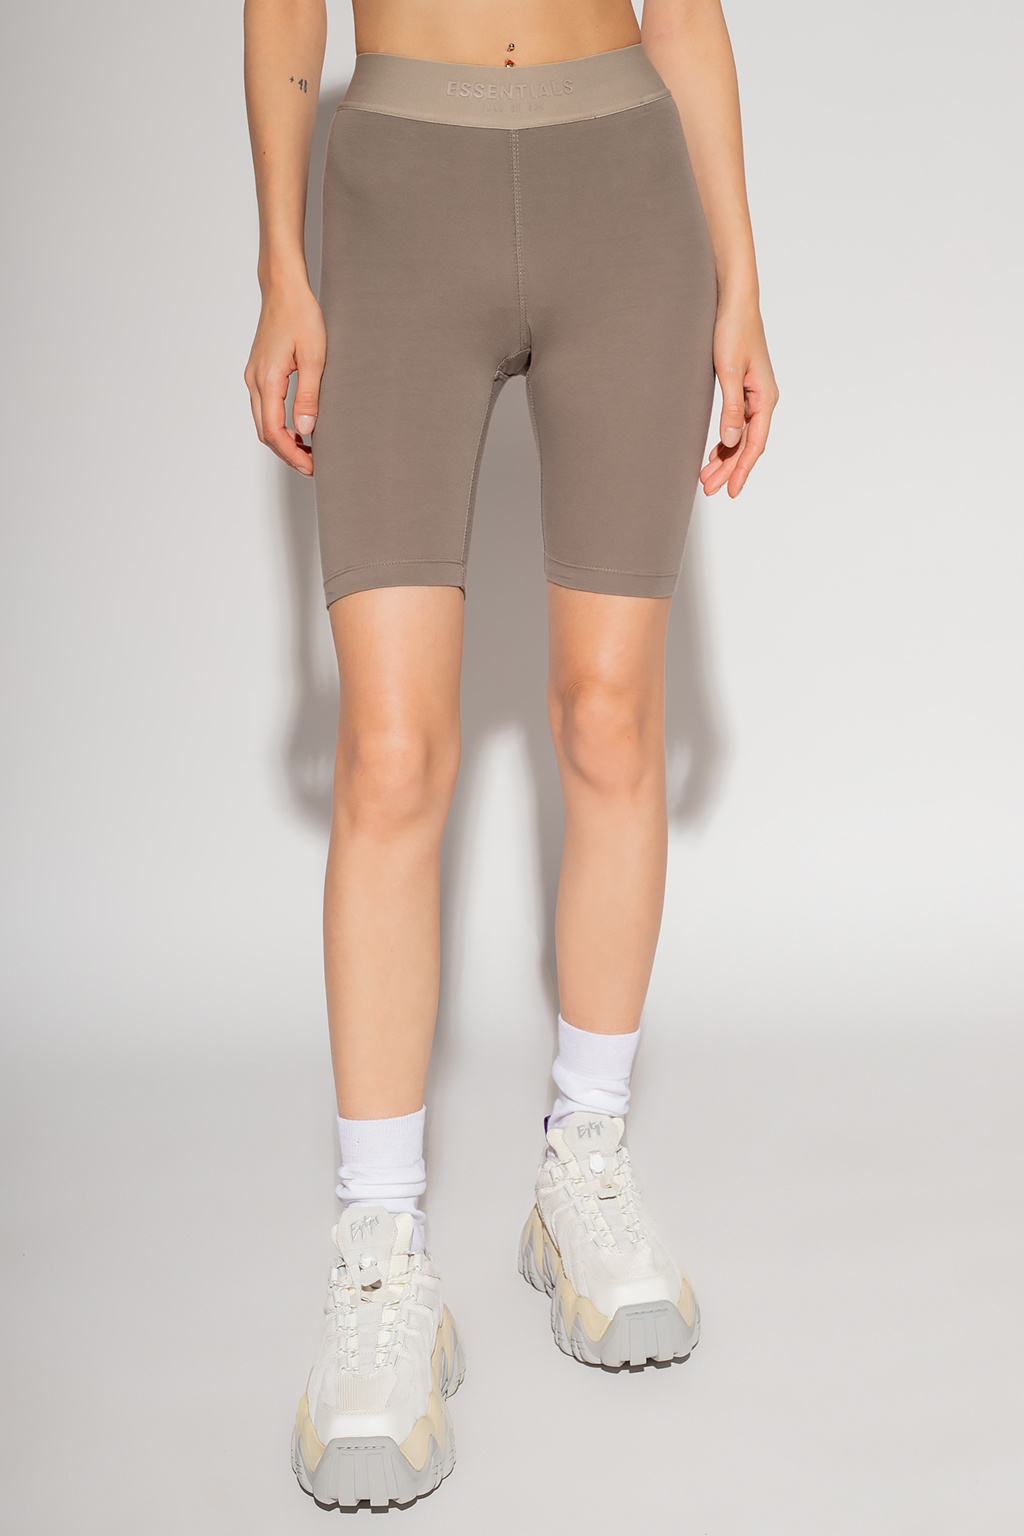 Fear Of God Essentials Short pleat with logo